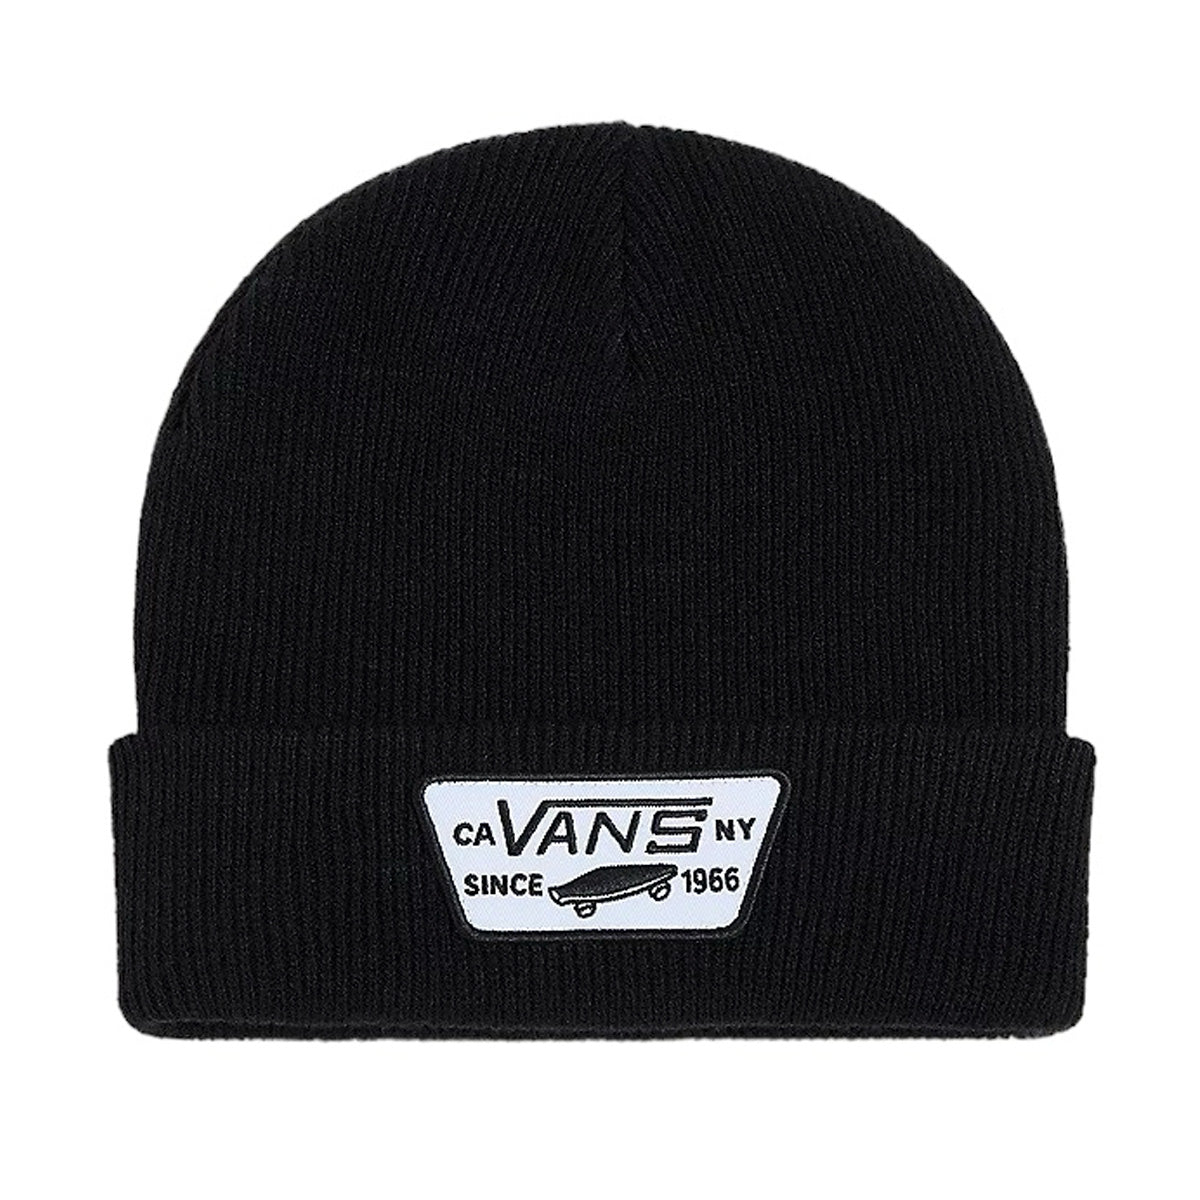 Black vans cuffed and ribbed beanie with black and white vans patch logo on front. Free uk shipping over £50